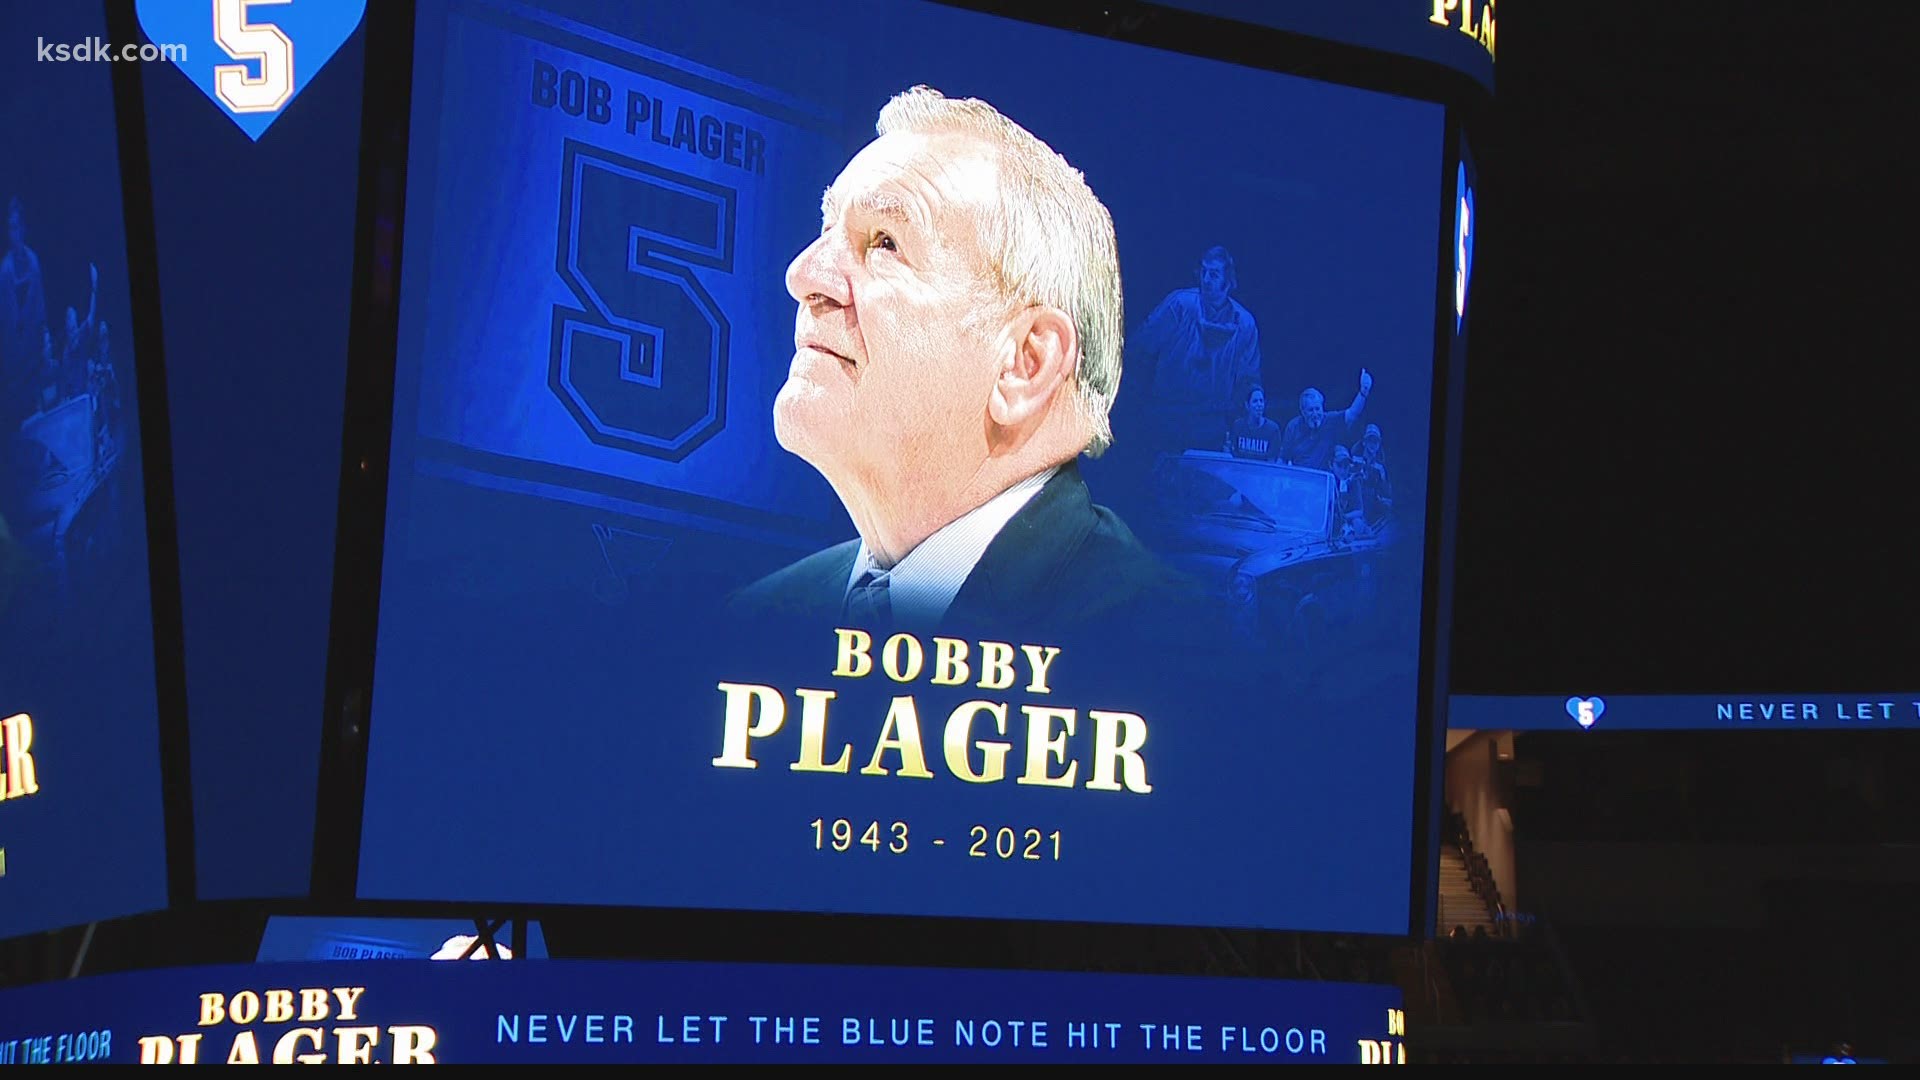 Plager was laid to rest Sunday after one last celebration and parade down Market Street.